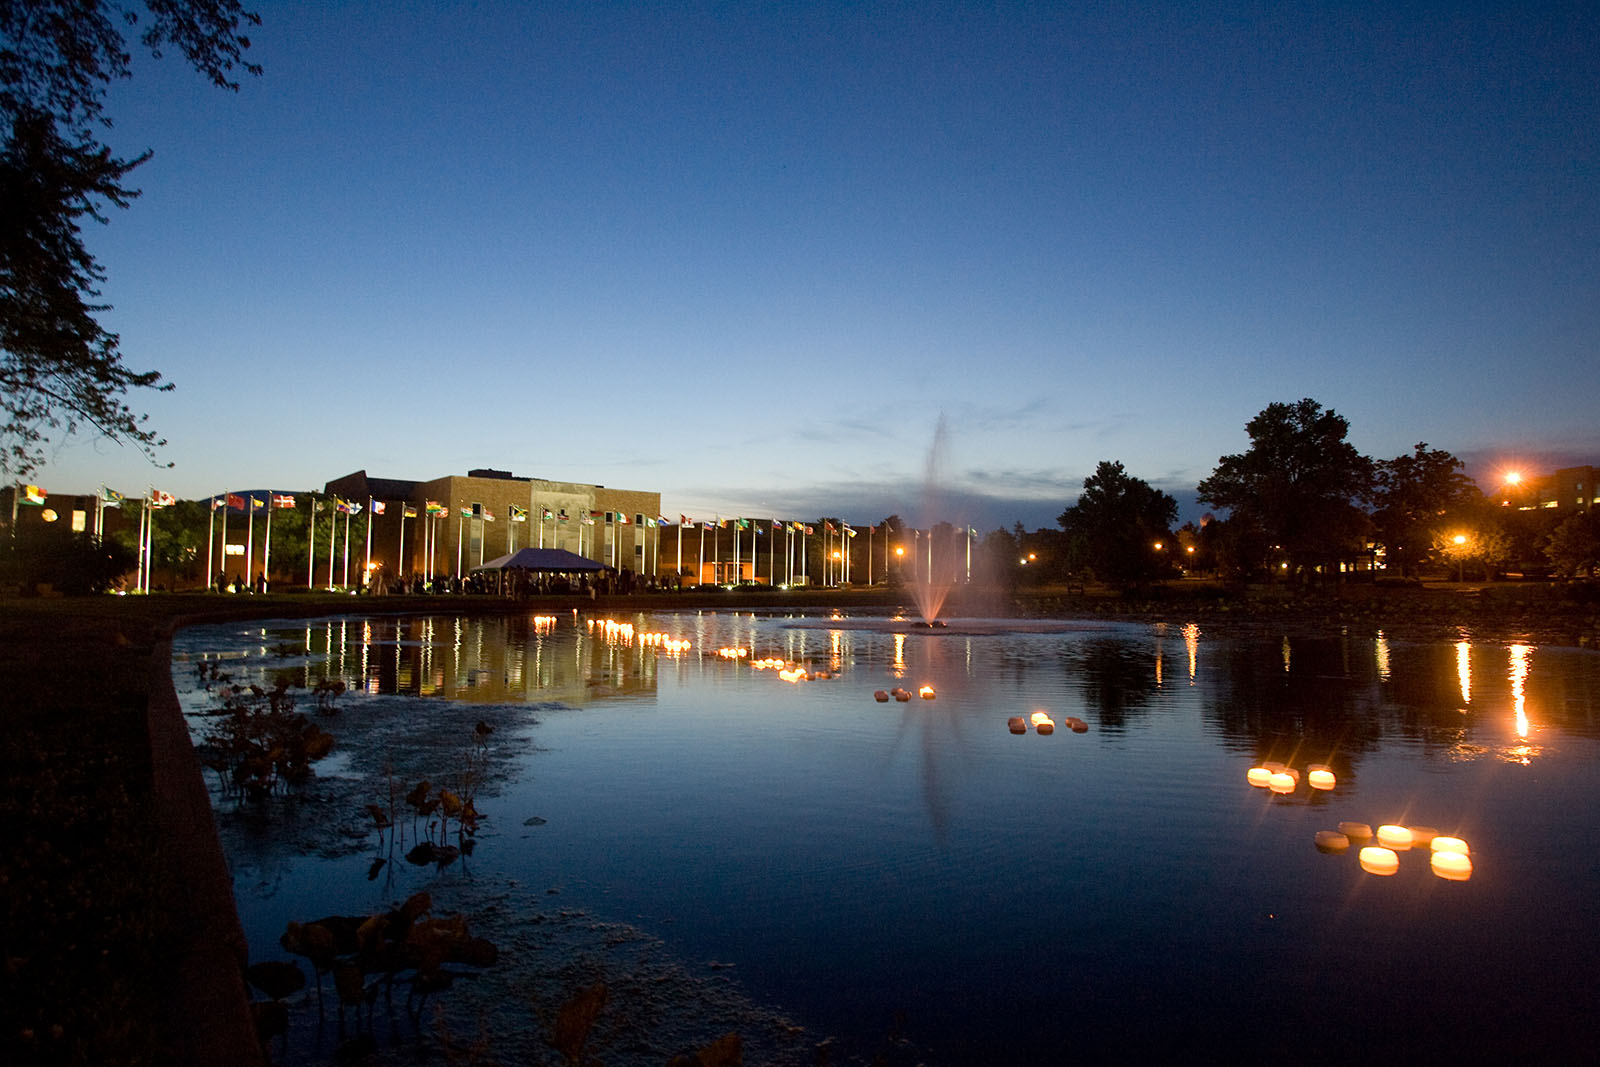 The International Plaza, seen here at night from across Colden Pond, was completed entirely through $400,000 in donations, with the most generous donation from Joyce and Harvey White, a couple with long-standing ties to Northwest.